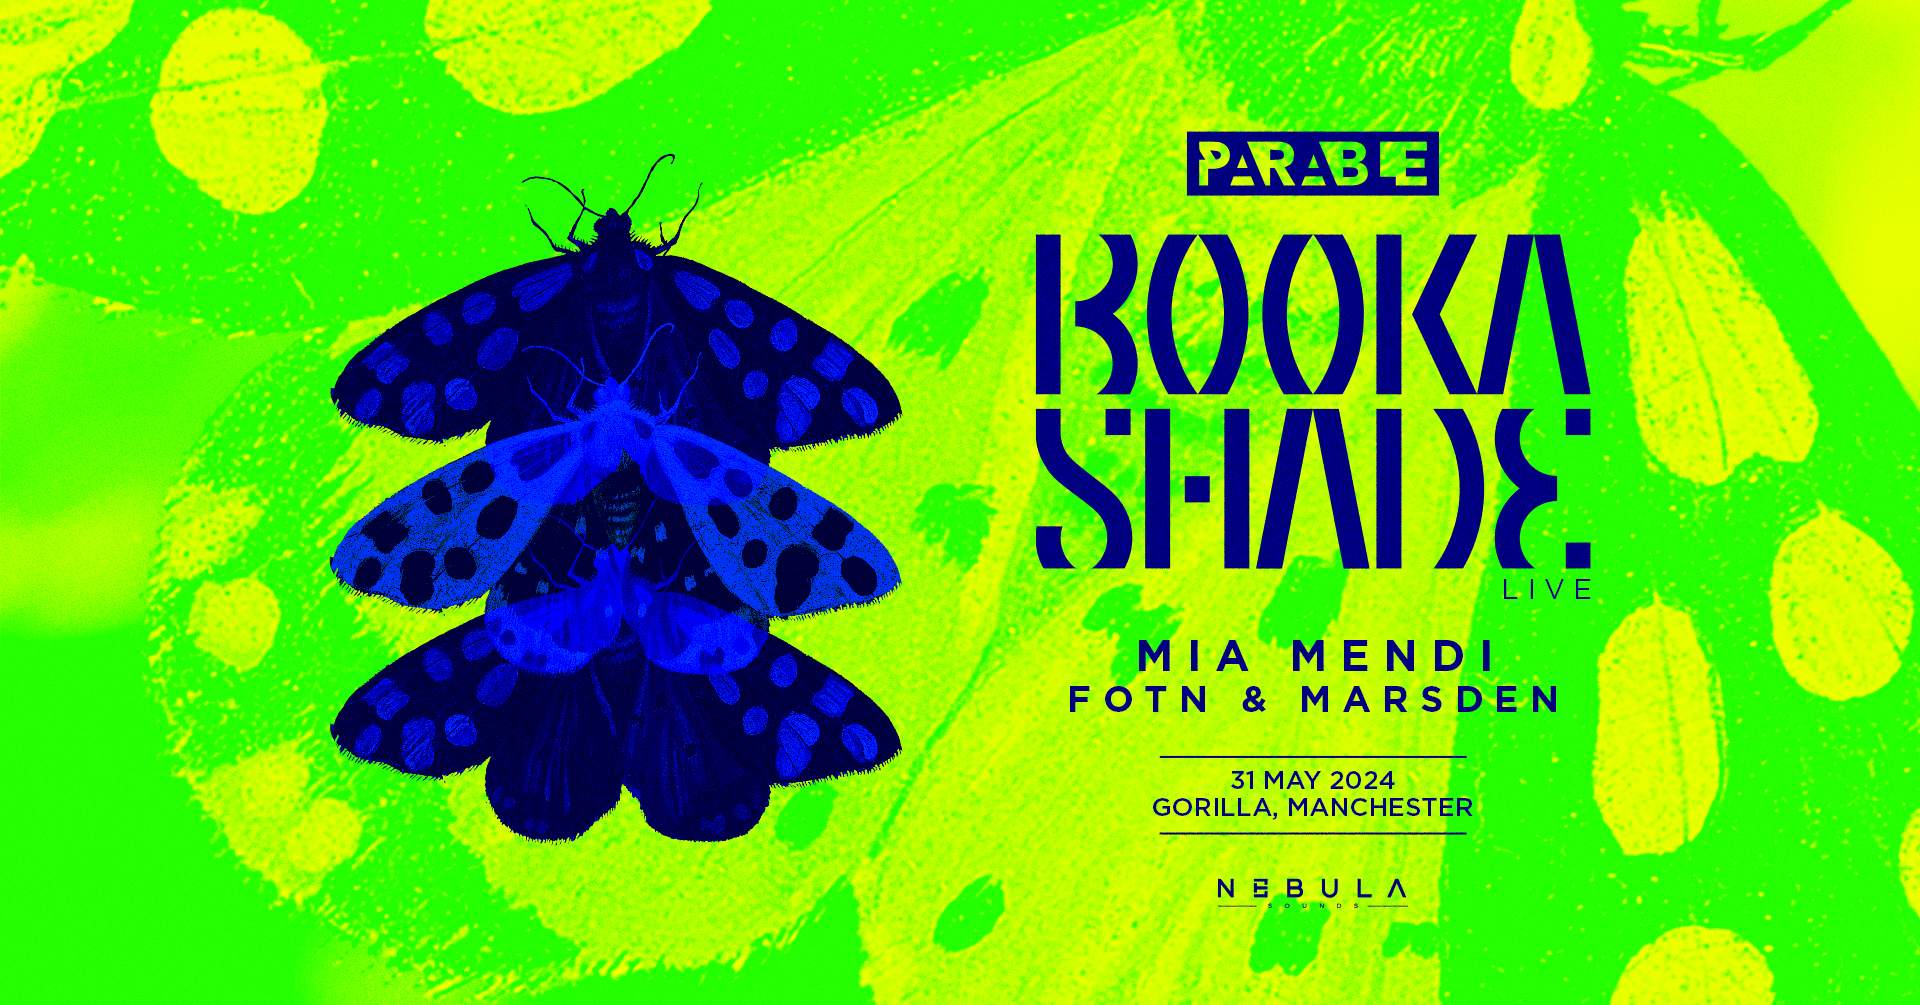 Parable presents: Booka Shade live in Manchester - Página frontal